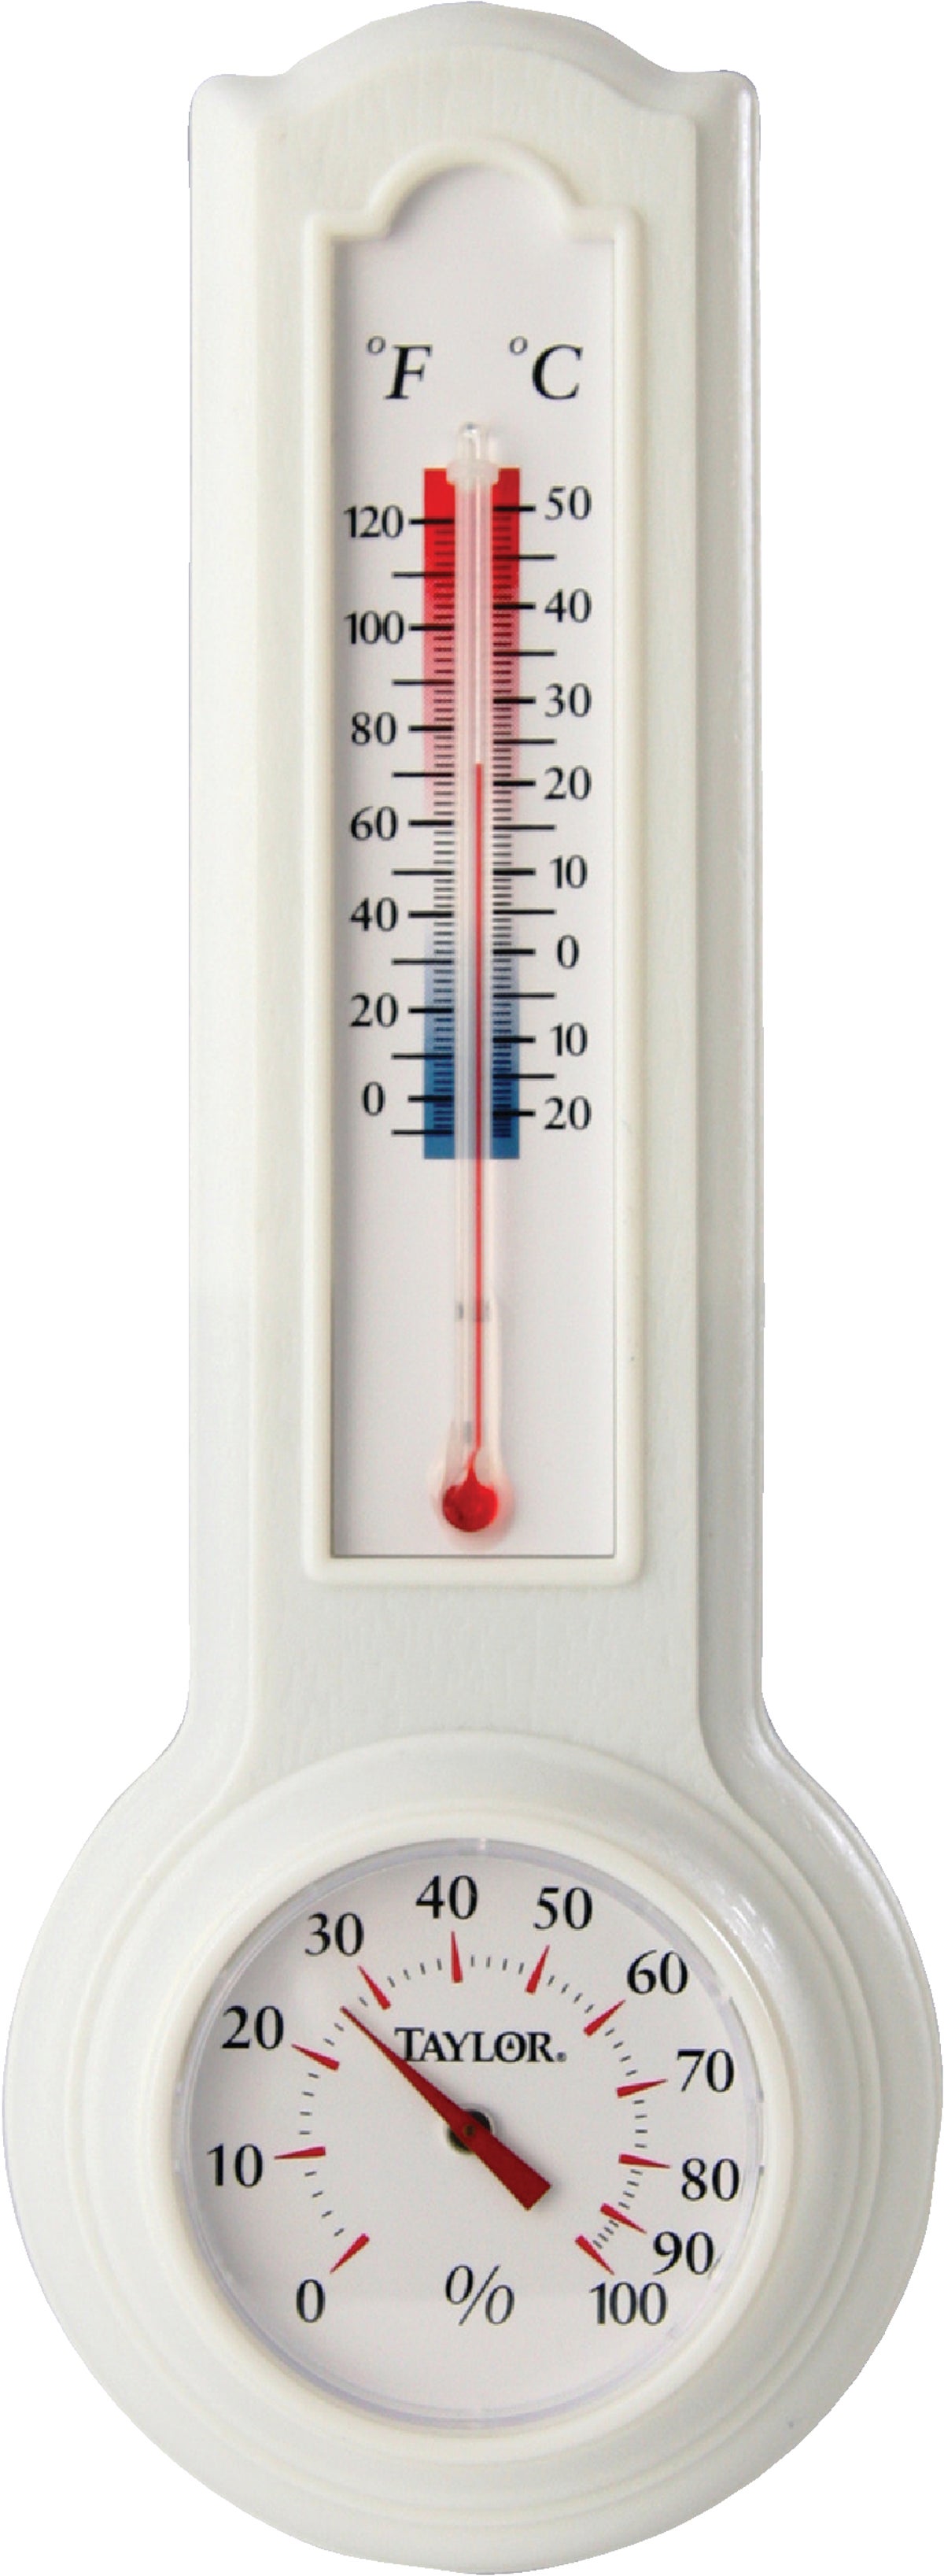 Lacrosse Technology 8.75 in. Thermometer/Hygrometer